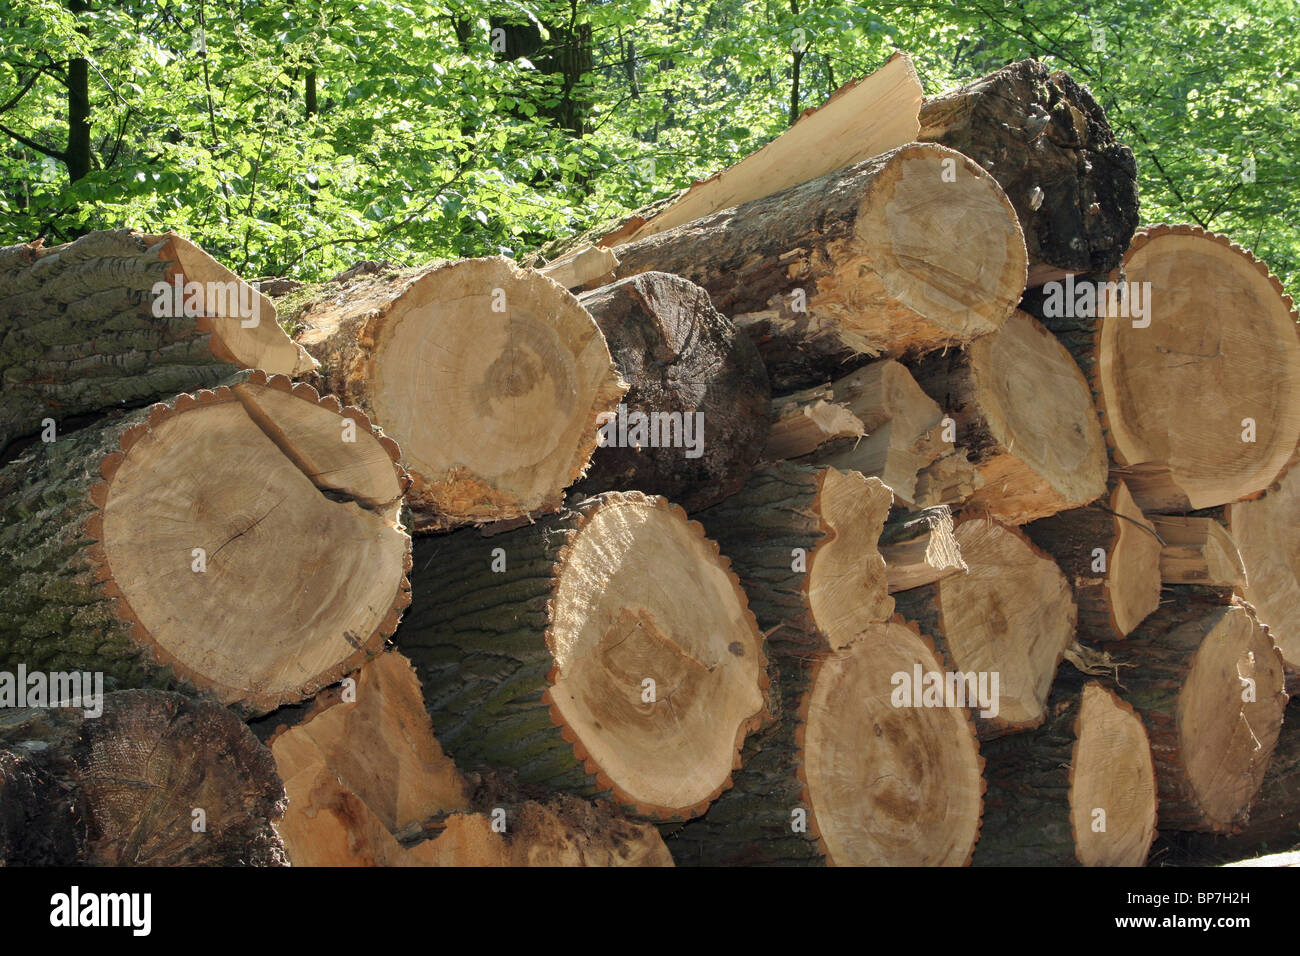 Cut logs stacked in a forest. Stock Photo